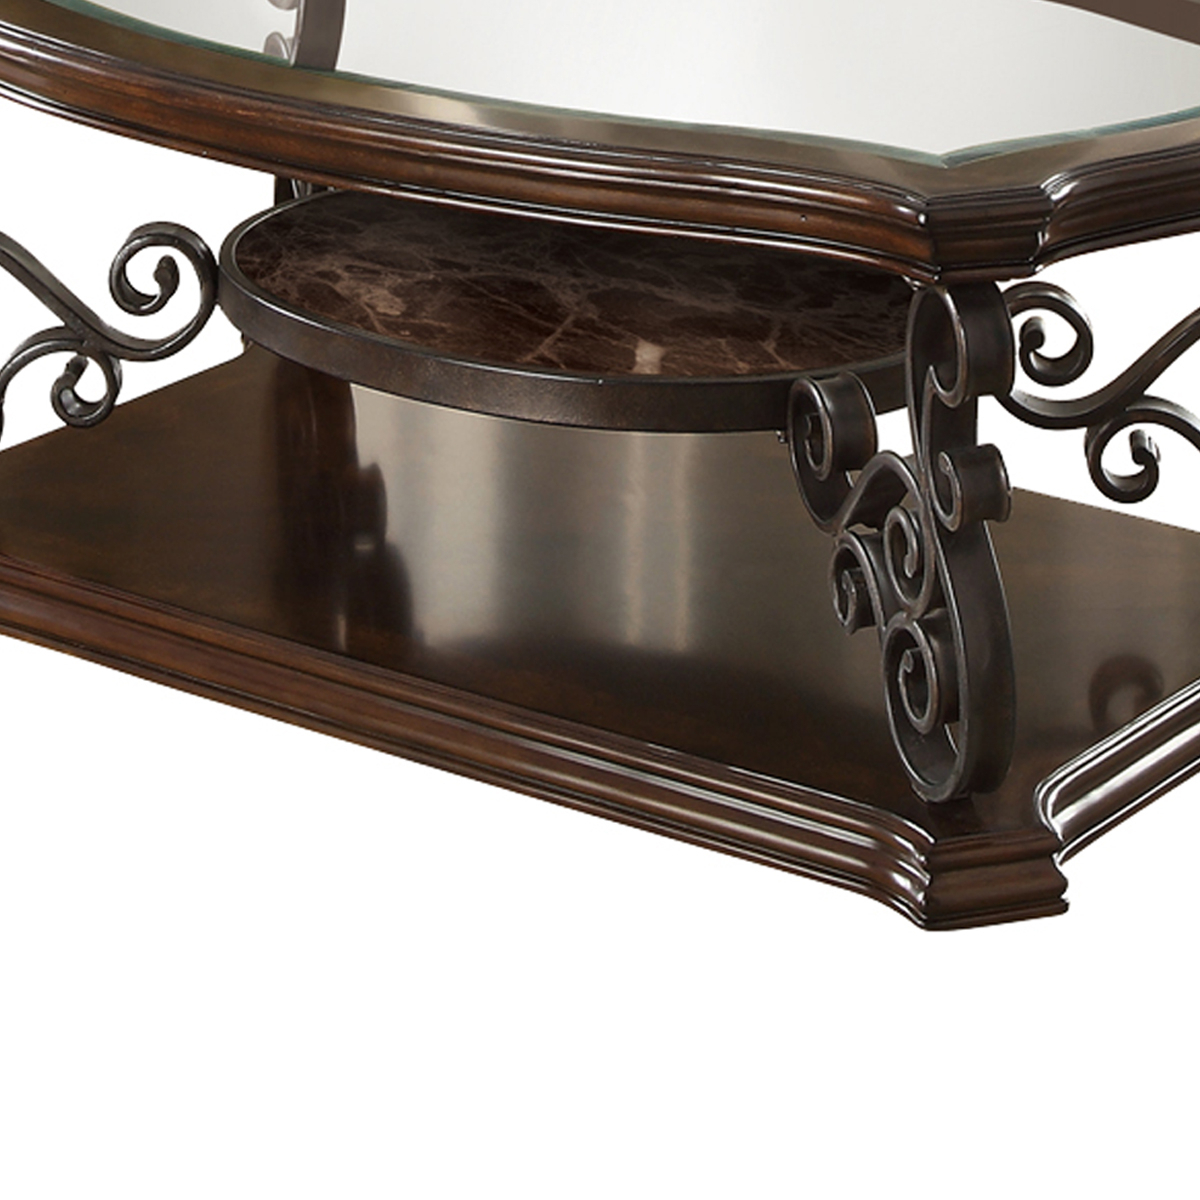 Tempered Glass Top Wooden Coffee Table With Ornate Metal Scrollwork, Brown- Saltoro Sherpi